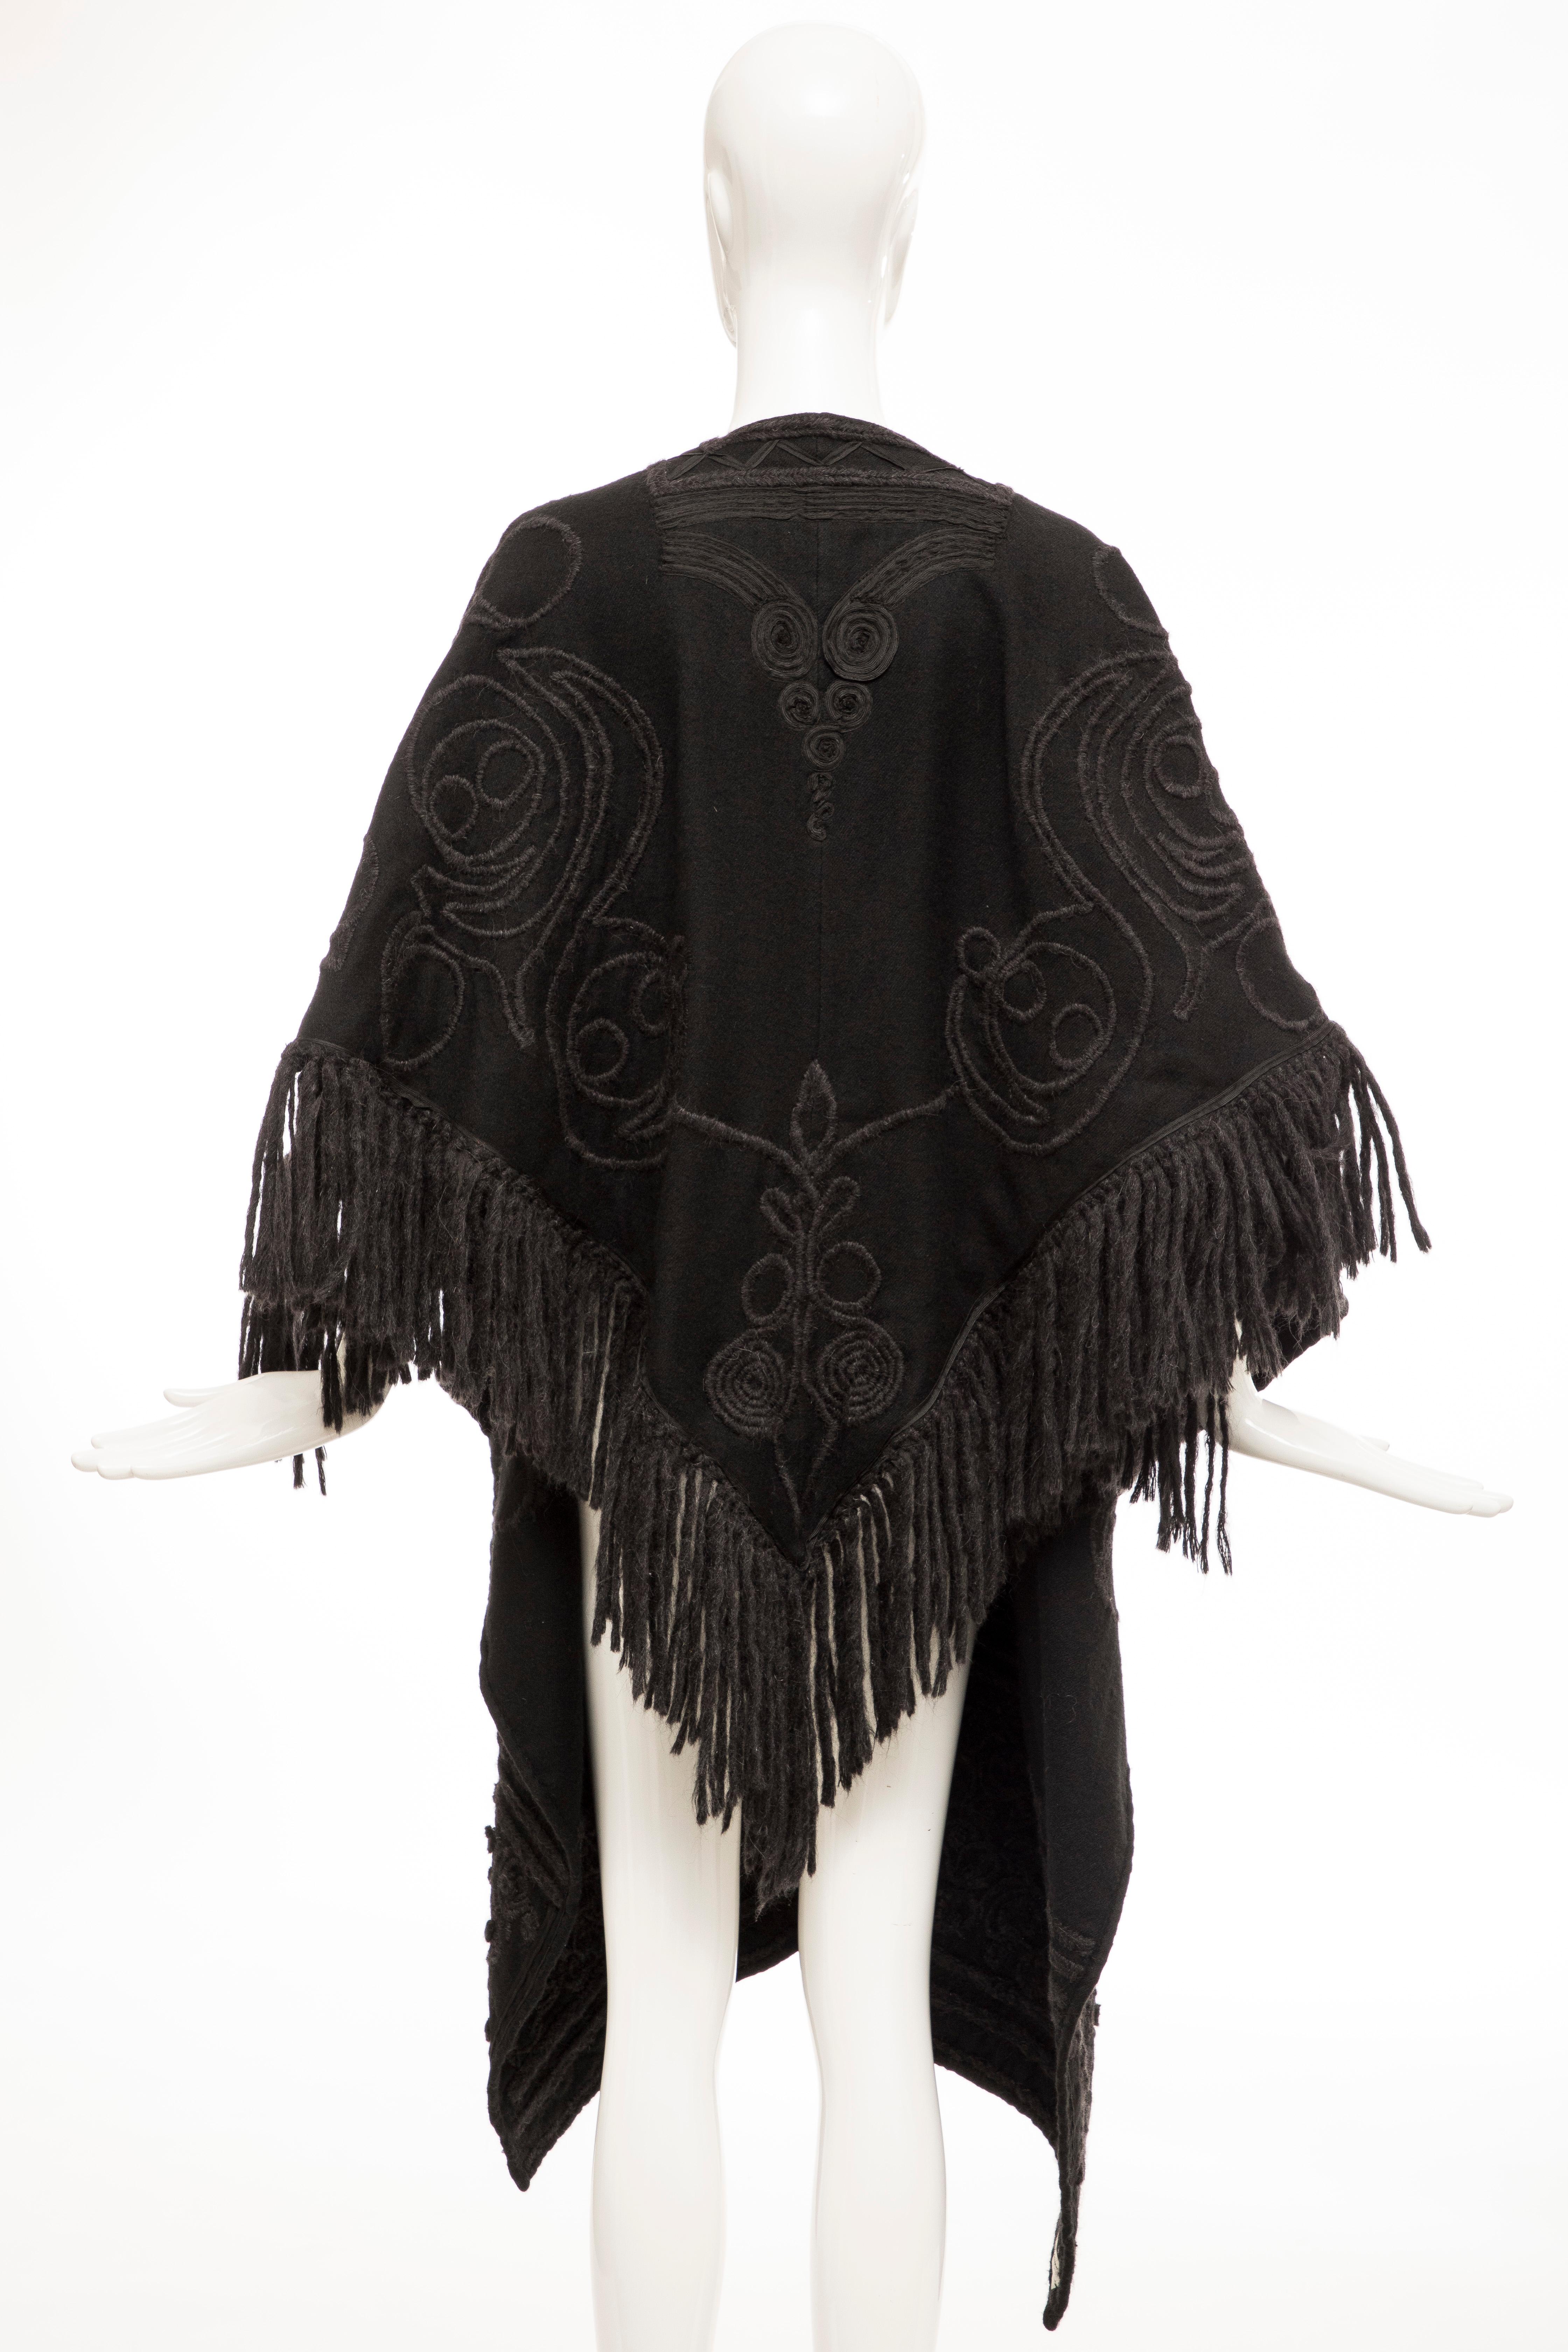 Dries Van Noten Runway Black Wool Embroidered Fringe Cape, Fall 2002 For Sale 1